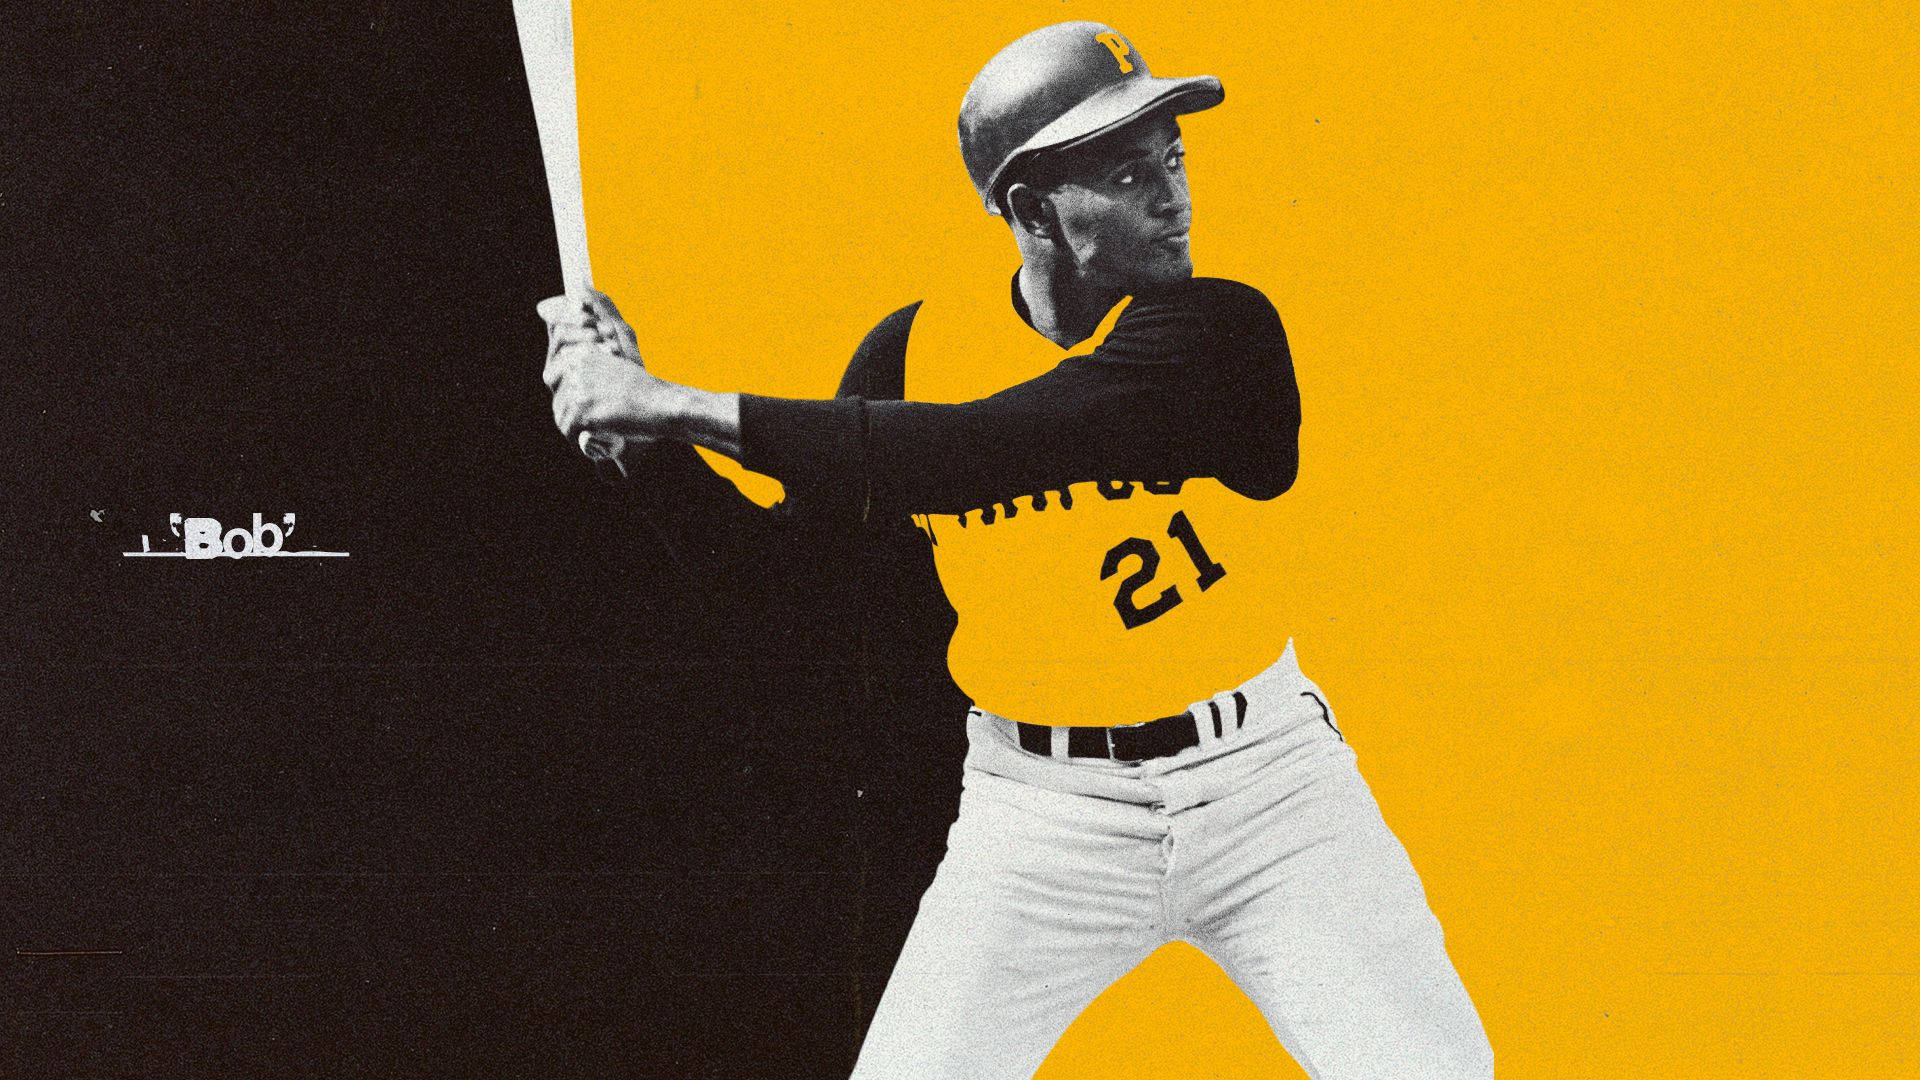 Roberto Clemente Black And Yellow Poster Background